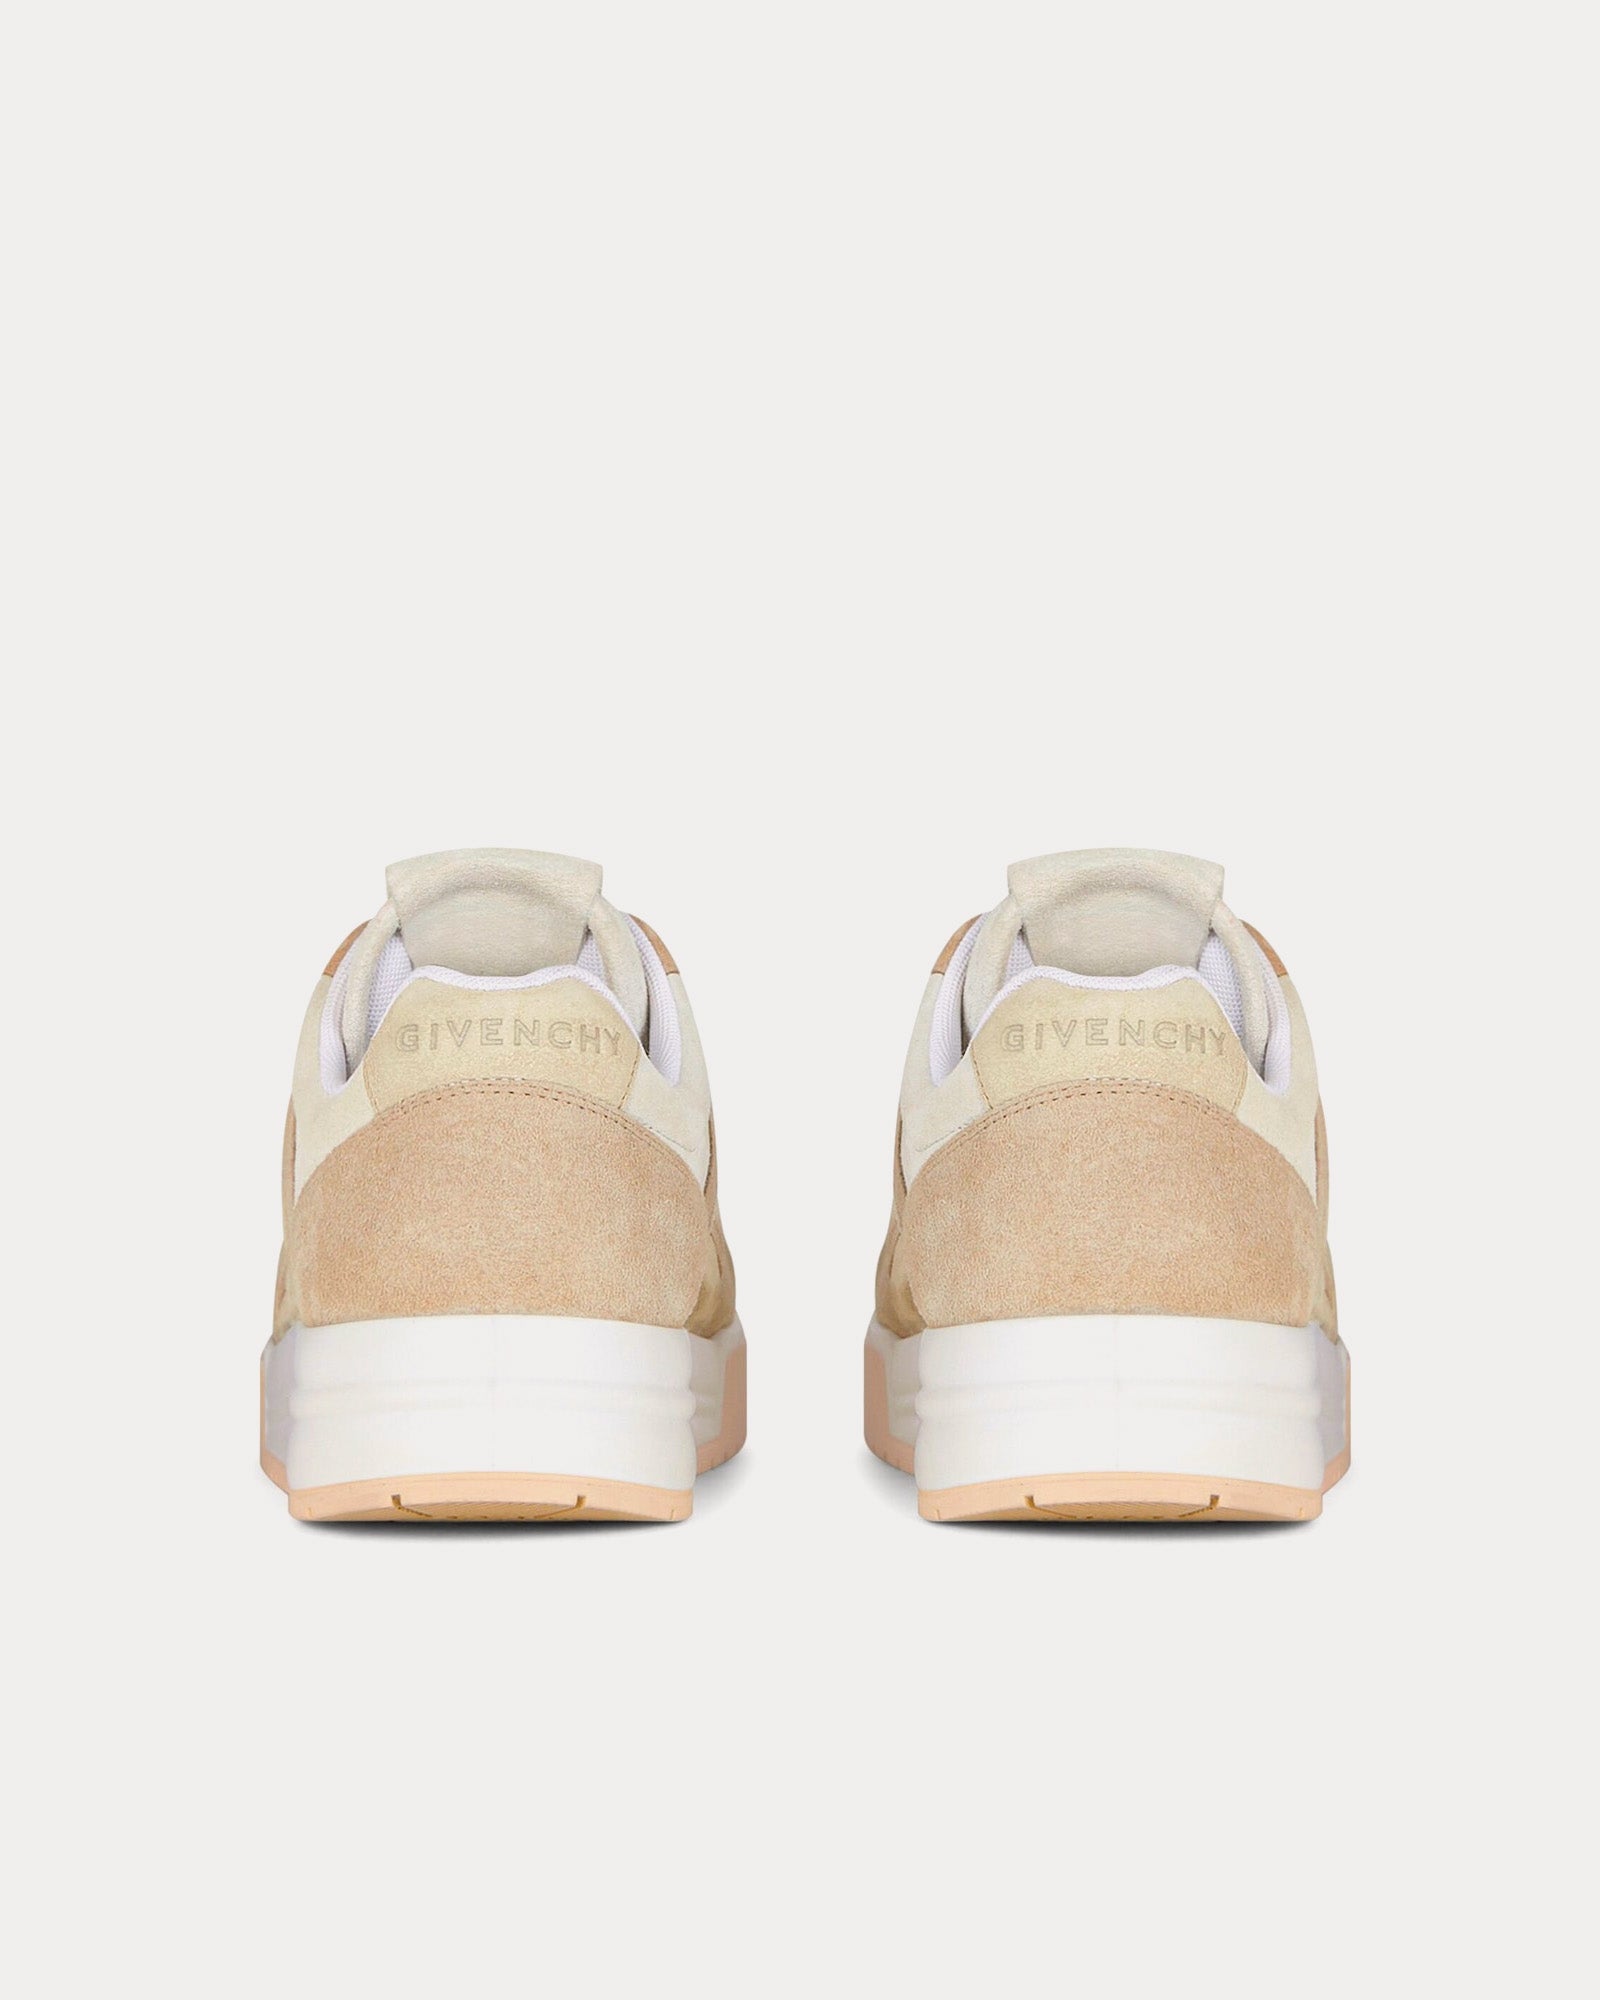 Givenchy - G4 Suede Beige / White Low Top Sneakers